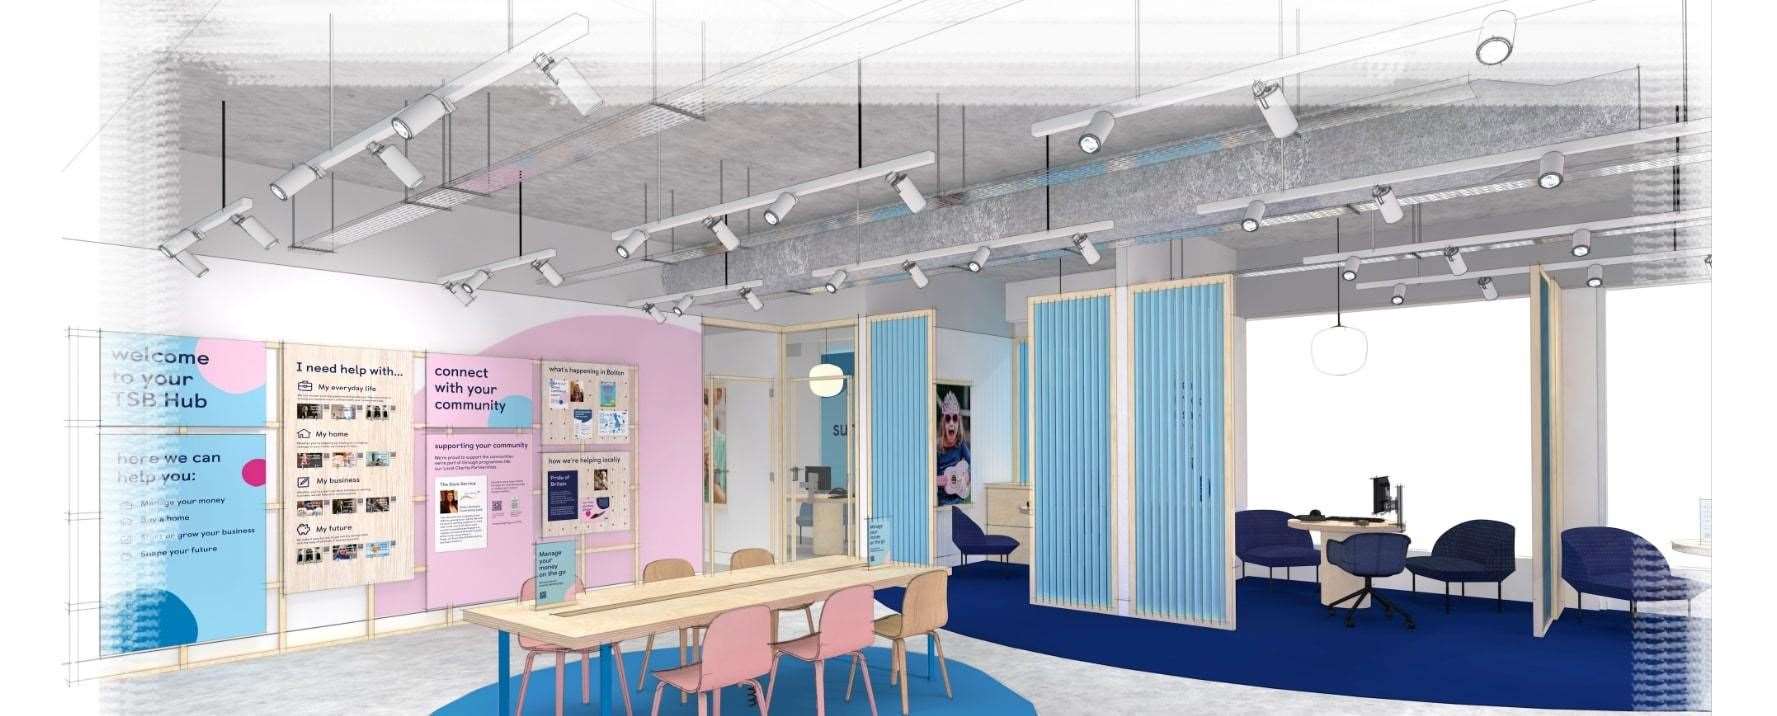 Artist's impresion on how the Inverness branch will look after the refit.